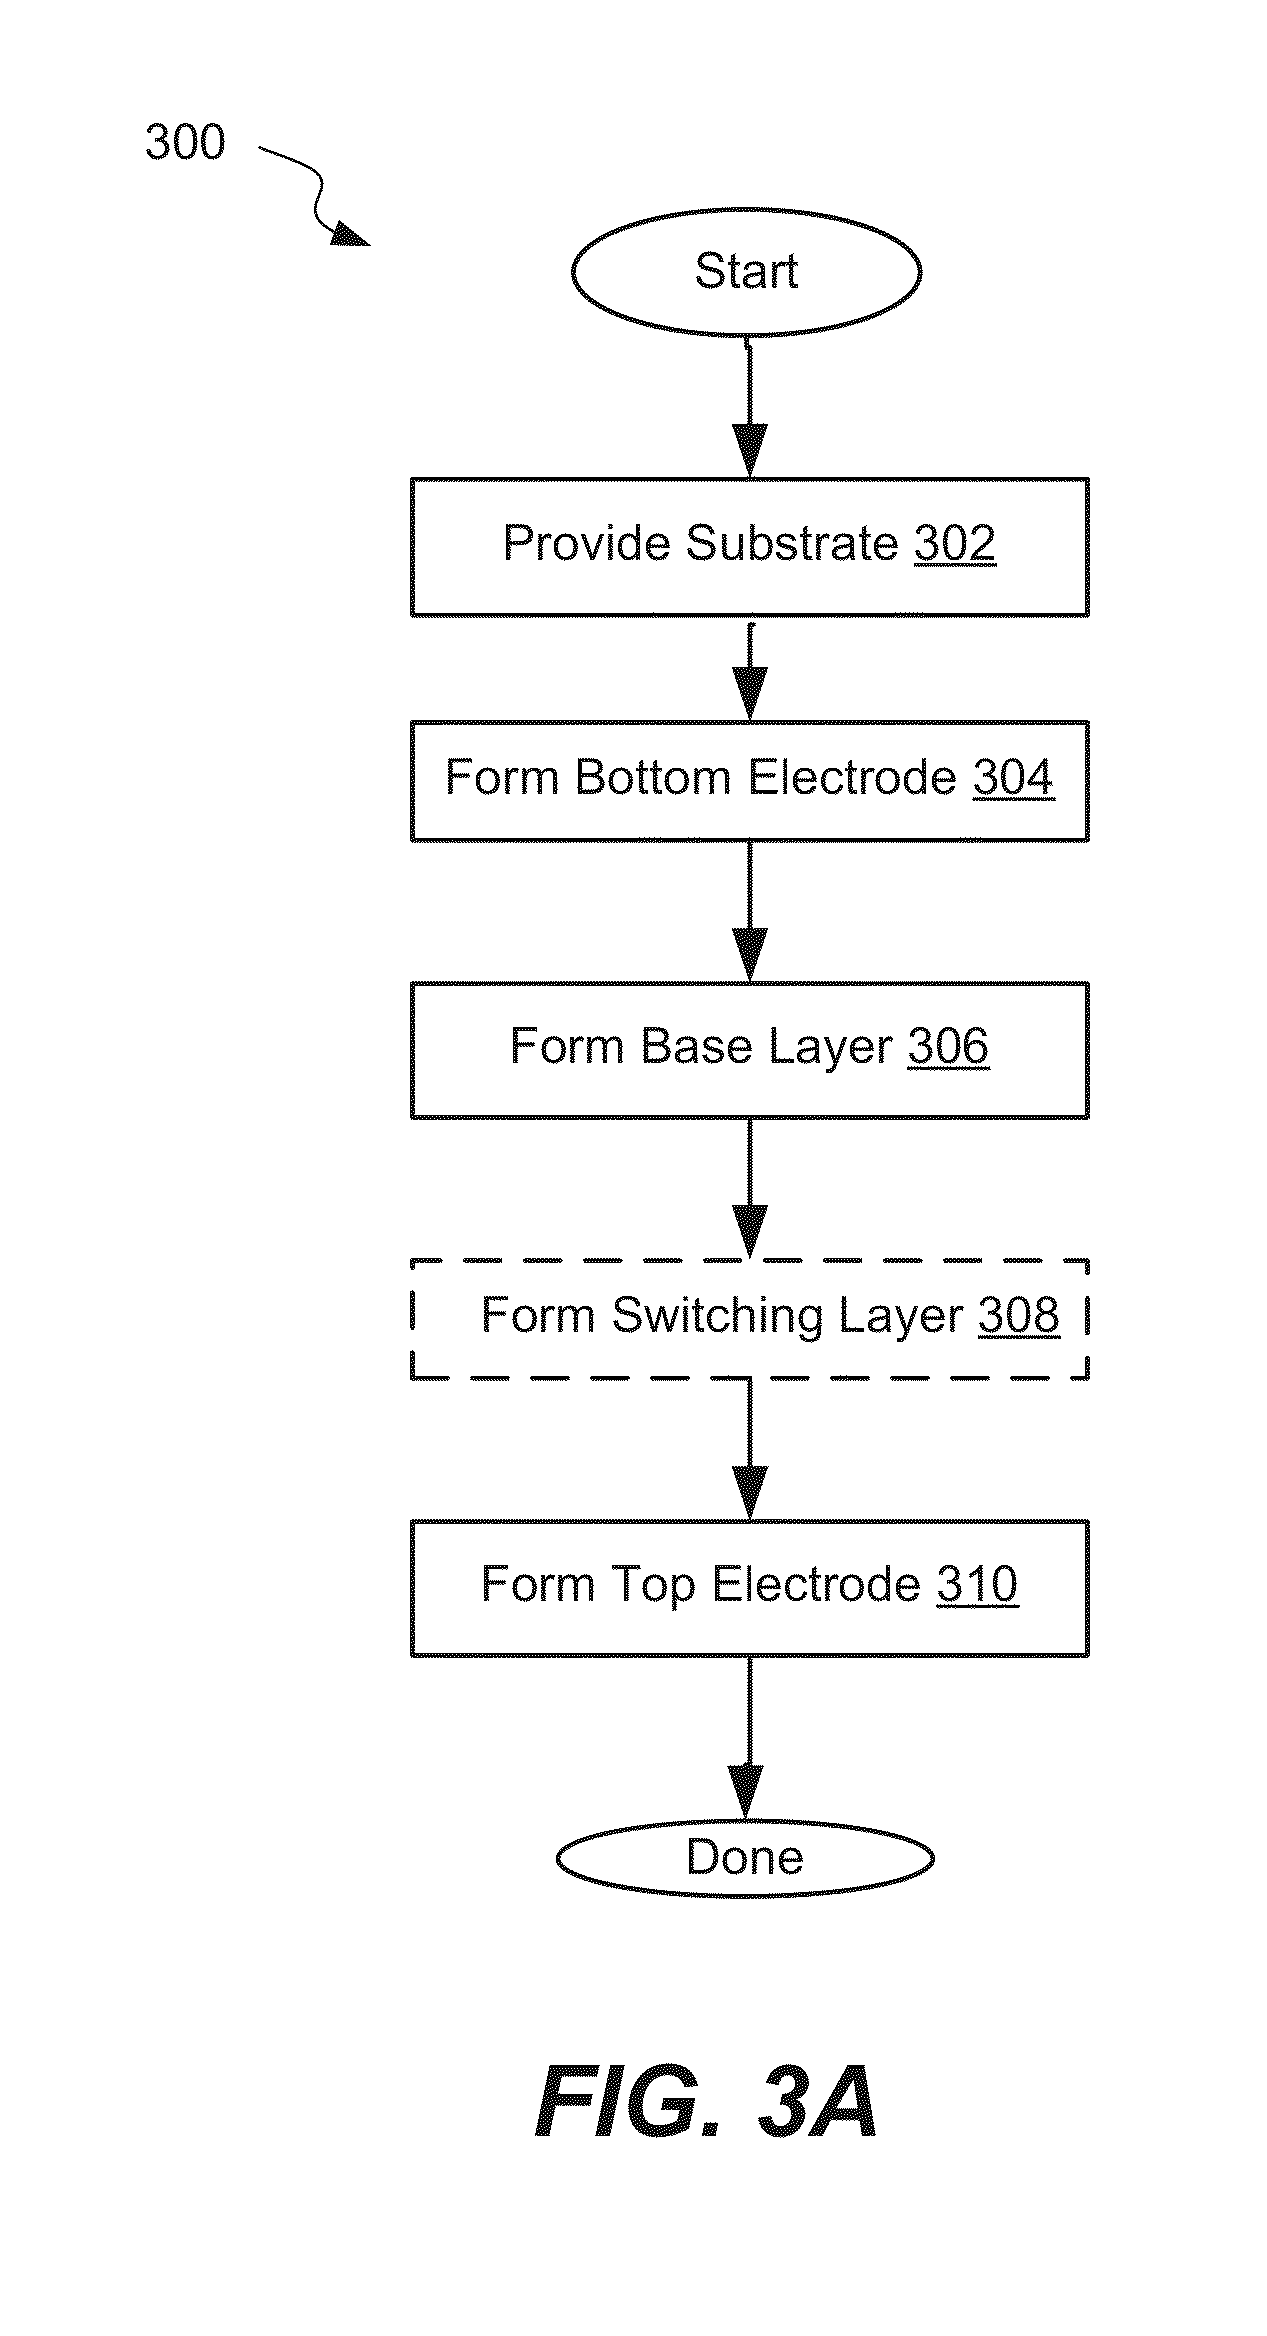 Resistive Switching Layers Including Hf-Al-O